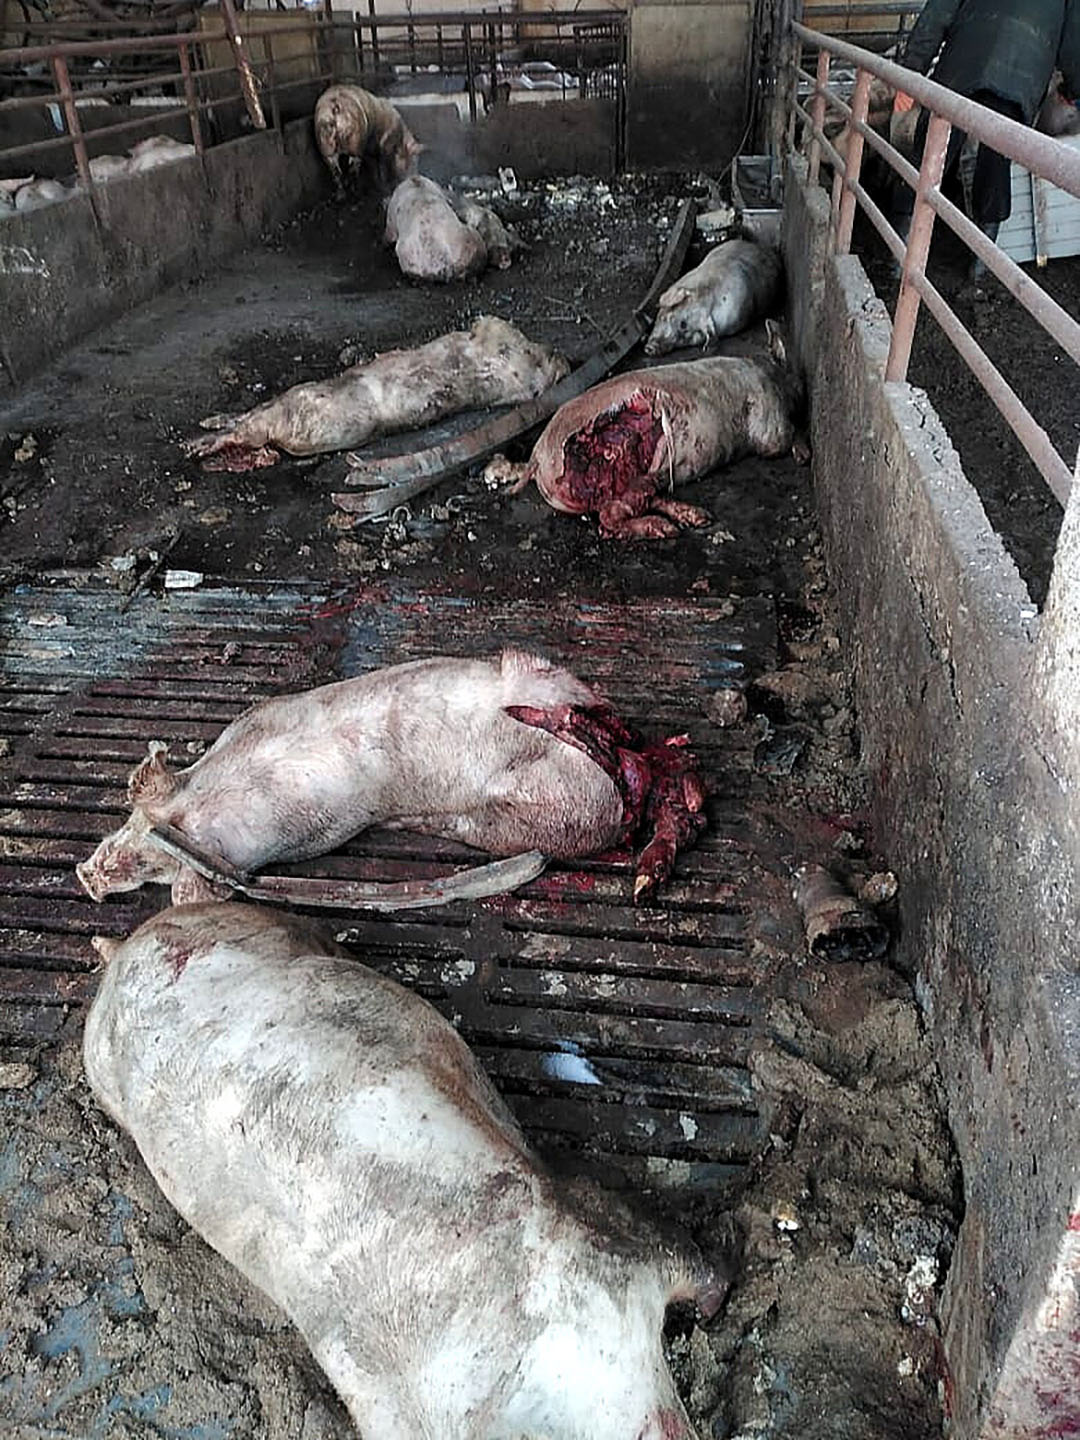 As pig houses were shelled by the Russians many animals were killed inside.